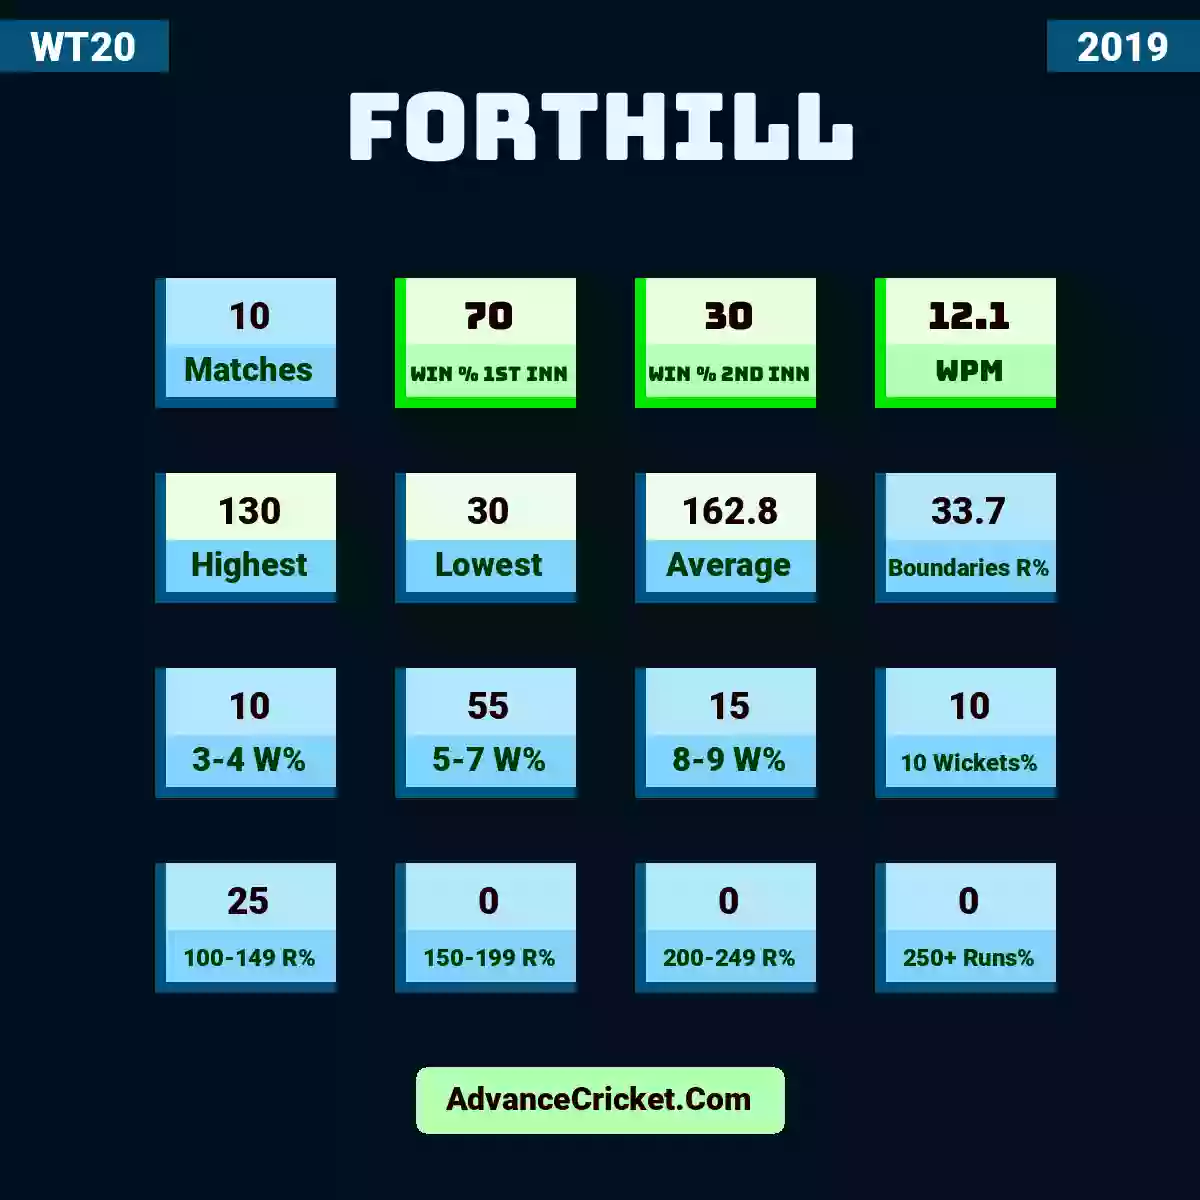 Image showing Forthill with Matches: 10, Win % 1st Inn: 70, Win % 2nd Inn: 30, WPM: 12.1, Highest: 130, Lowest: 30, Average: 162.8, Boundaries R%: 33.7, 3-4 W%: 10, 5-7 W%: 55, 8-9 W%: 15, 10 Wickets%: 10, 100-149 R%: 25, 150-199 R%: 0, 200-249 R%: 0, 250+ Runs%: 0.